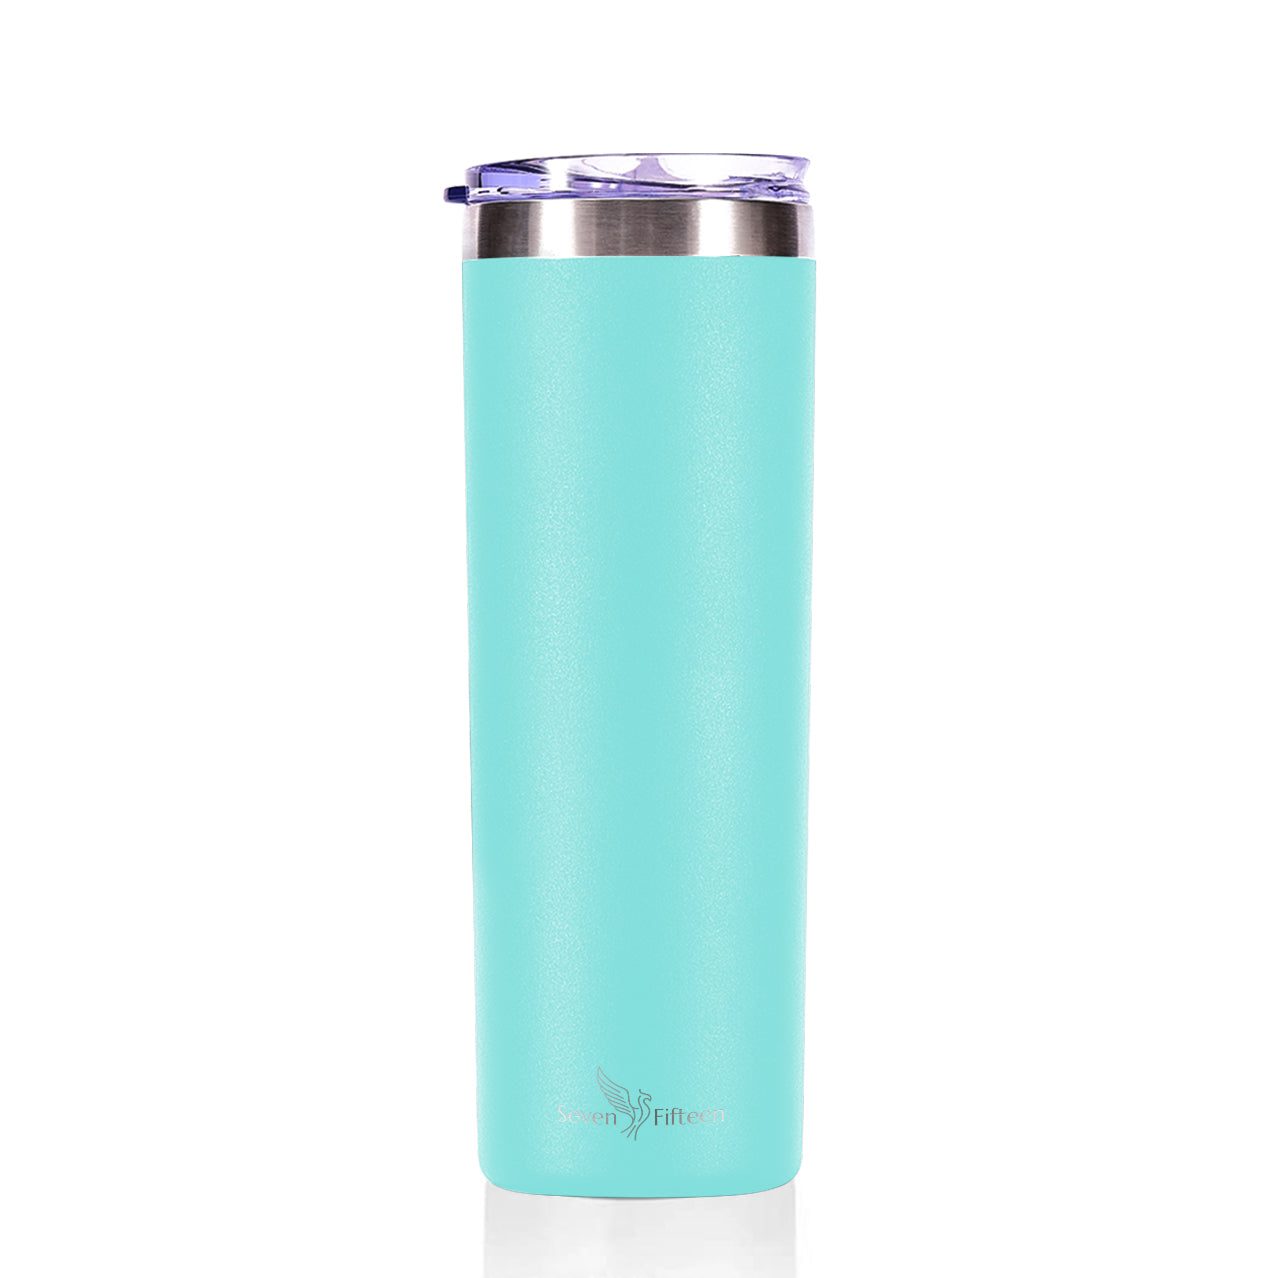 Personalized Stainless Steel Skinny 30 Oz Sublimation Tumblers With Lid  Ideal For Sublimation, Milk, Coffee, And Travel Available In 20oz And 30oz  Sizes From Kevinliu2765, $3.45